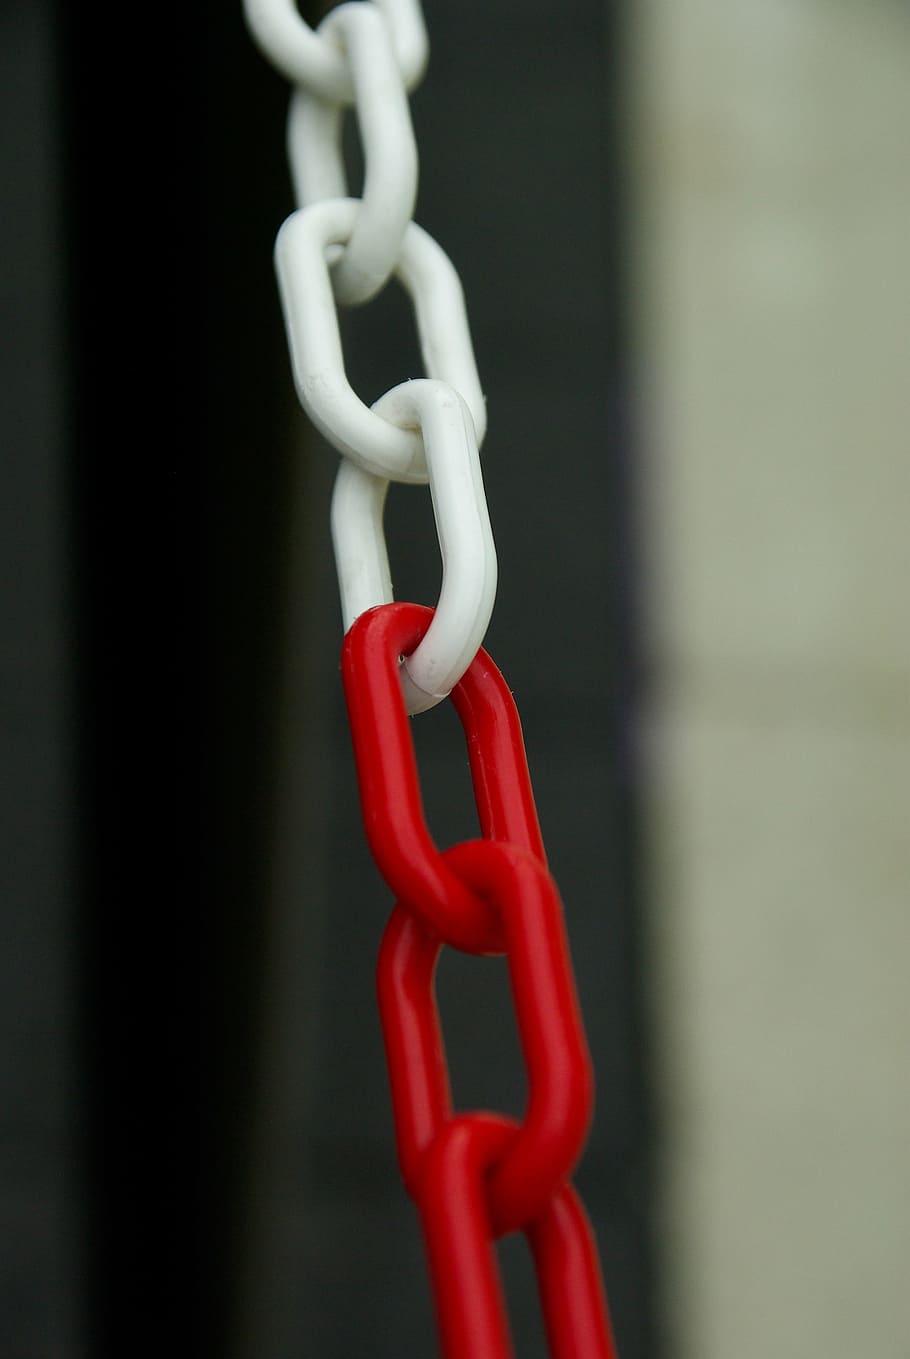 string, rings, tie, chain, white, red, link, connection, security, strength